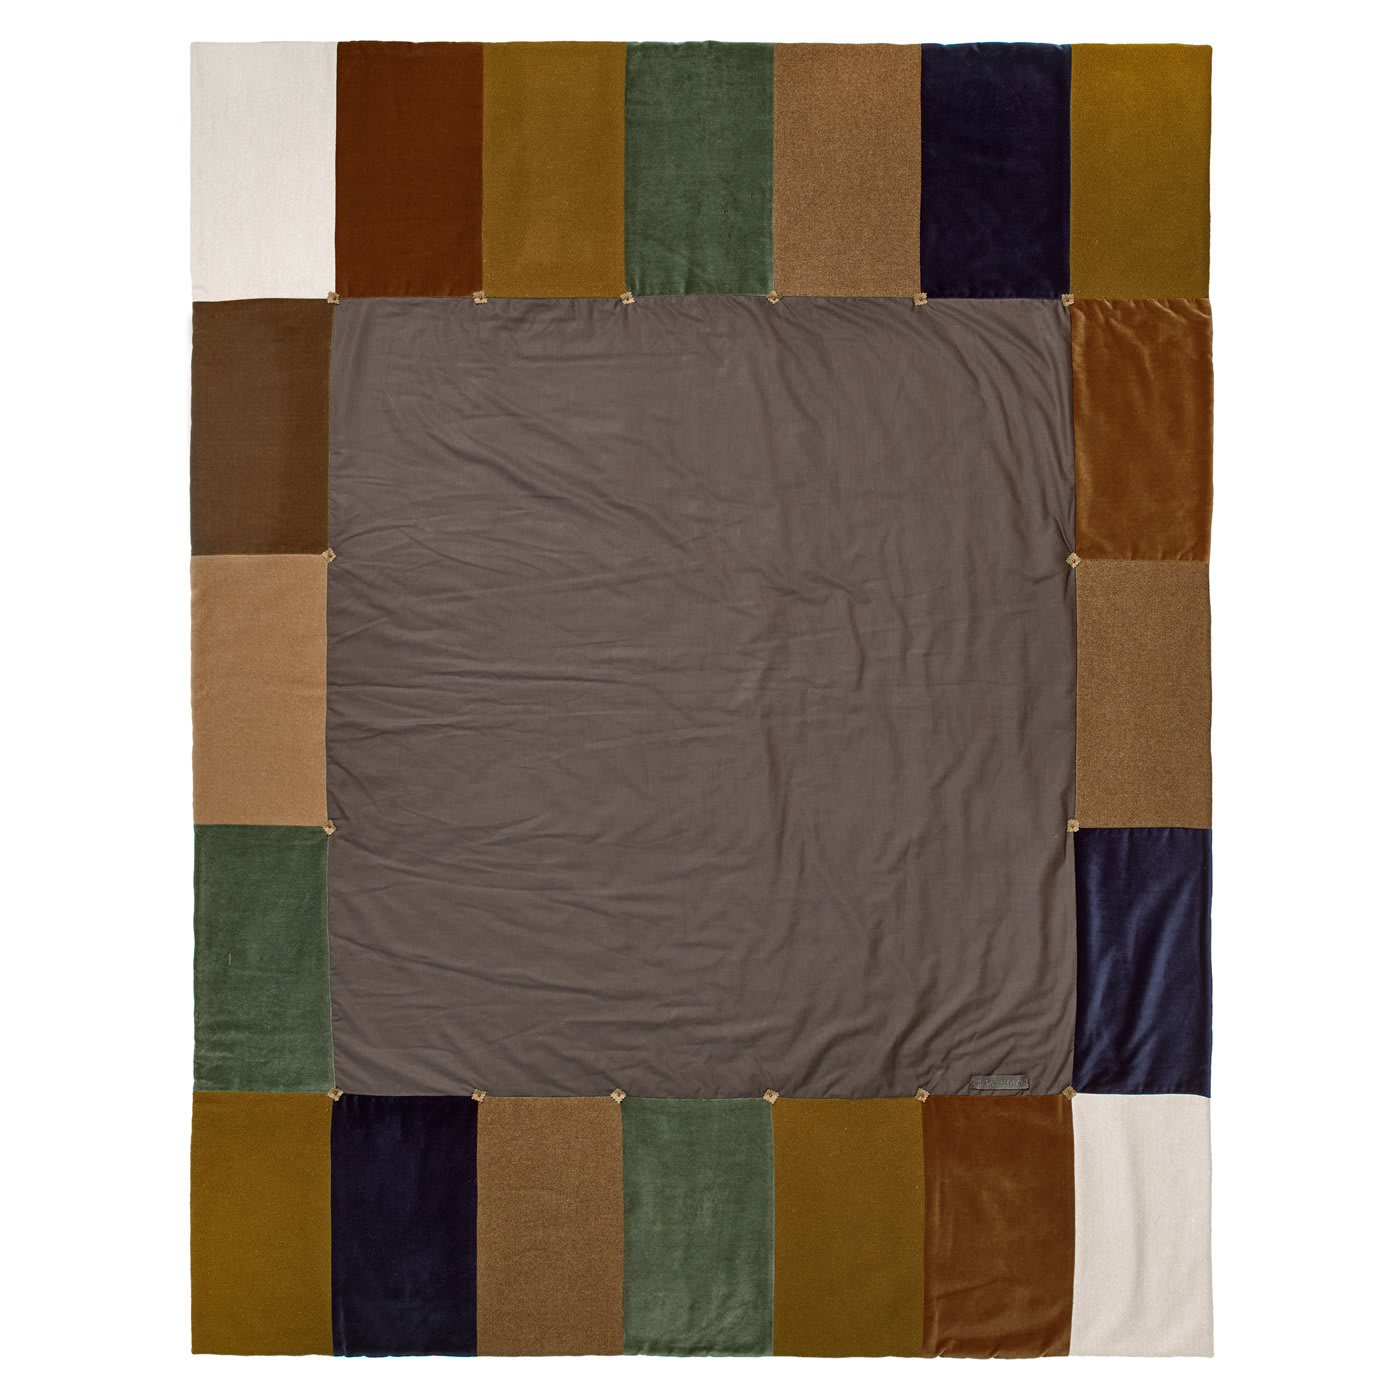 Multicolor and Midnight Blue Throw - Tre Palma